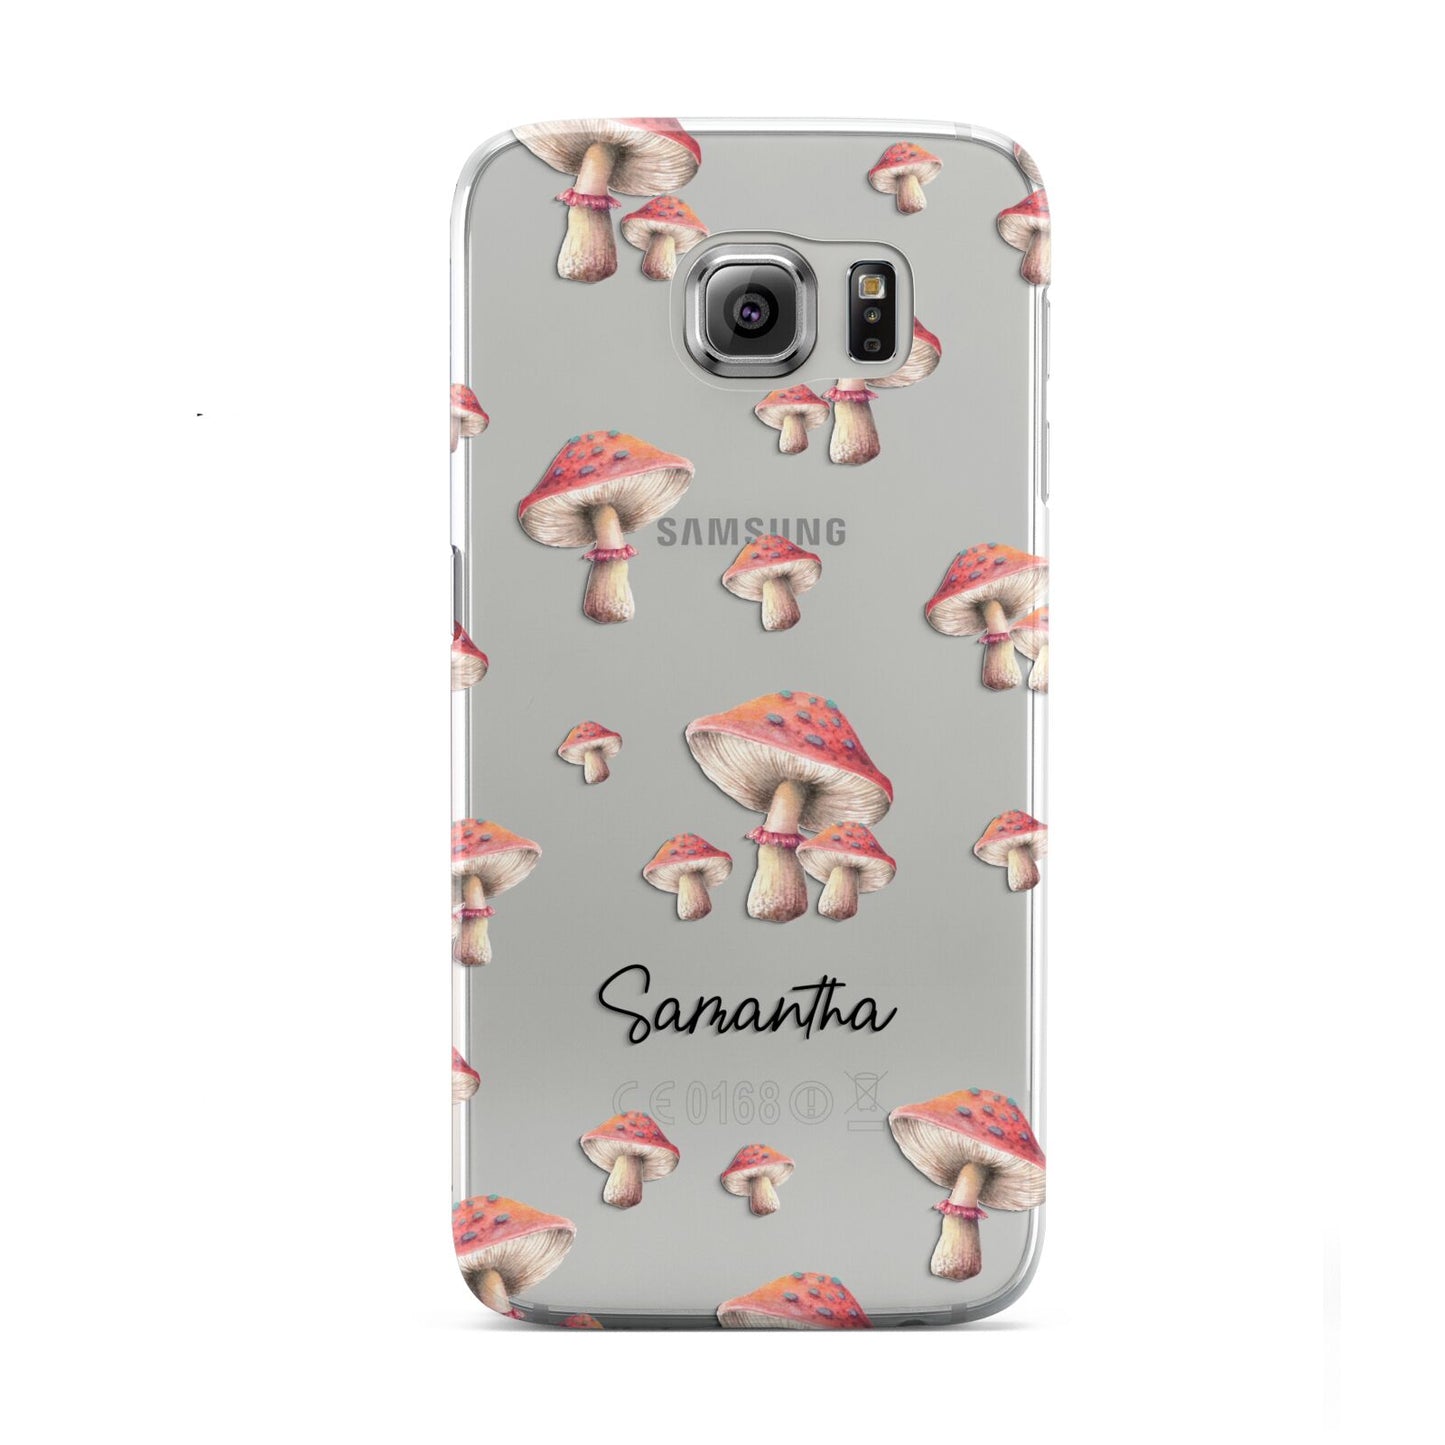 Mushroom Illustrations with Name Samsung Galaxy S6 Case